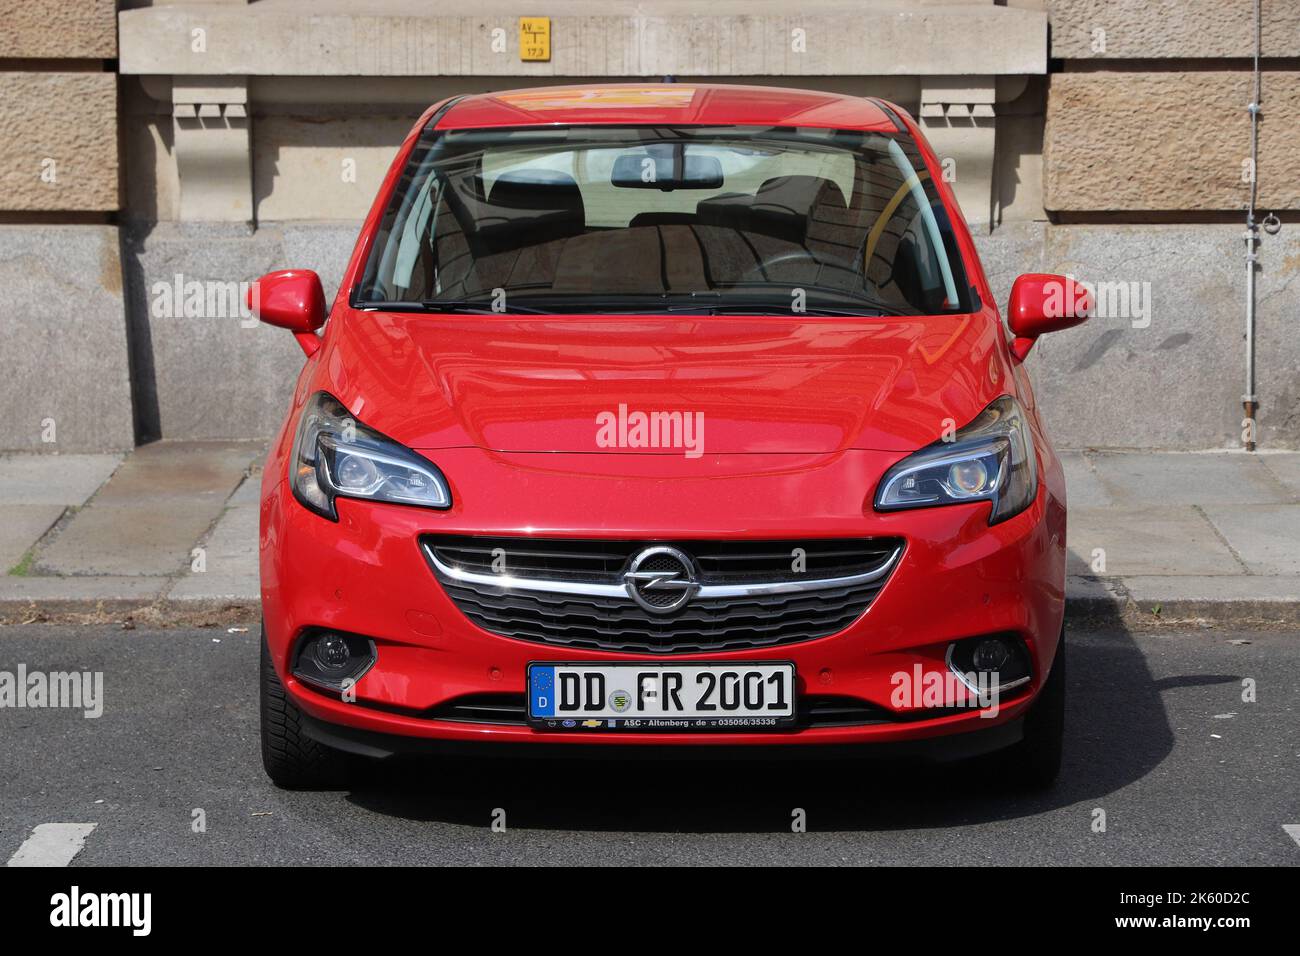 DRESDEN, GERMANY - MAY 10, 2018: Opel Corsa red hatchback small car parked in Germany. There were 45.8 million cars registered in Germany (as of 2017) Stock Photo